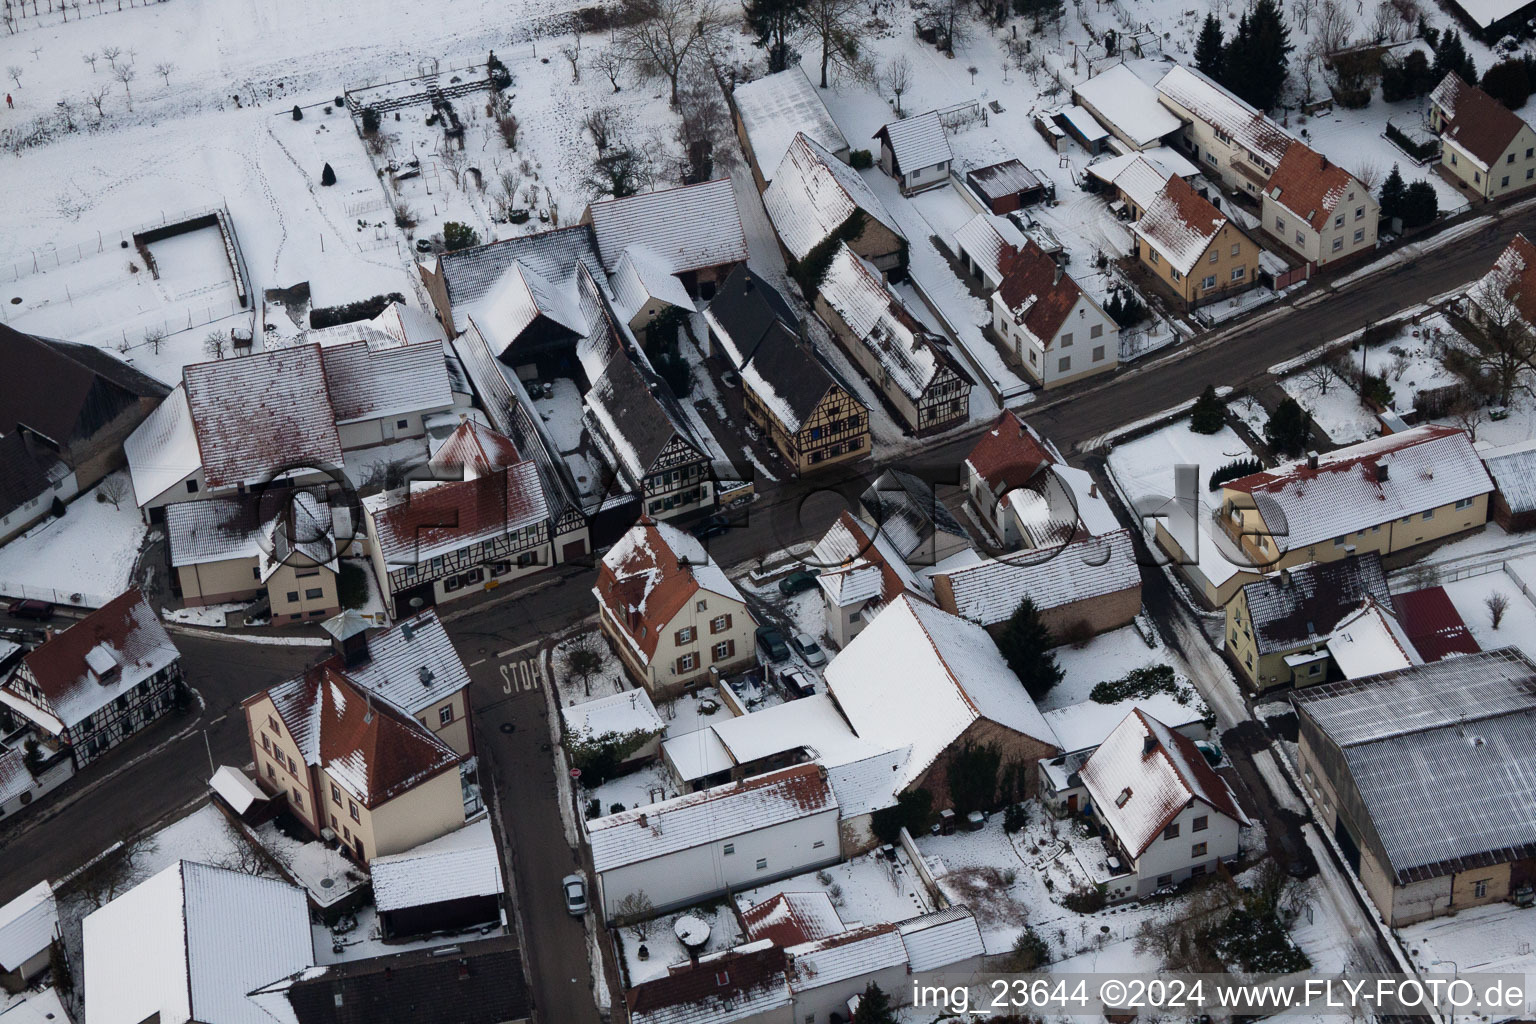 Oblique view of In the snow in winter in the district Kleinsteinfeld in Niederotterbach in the state Rhineland-Palatinate, Germany